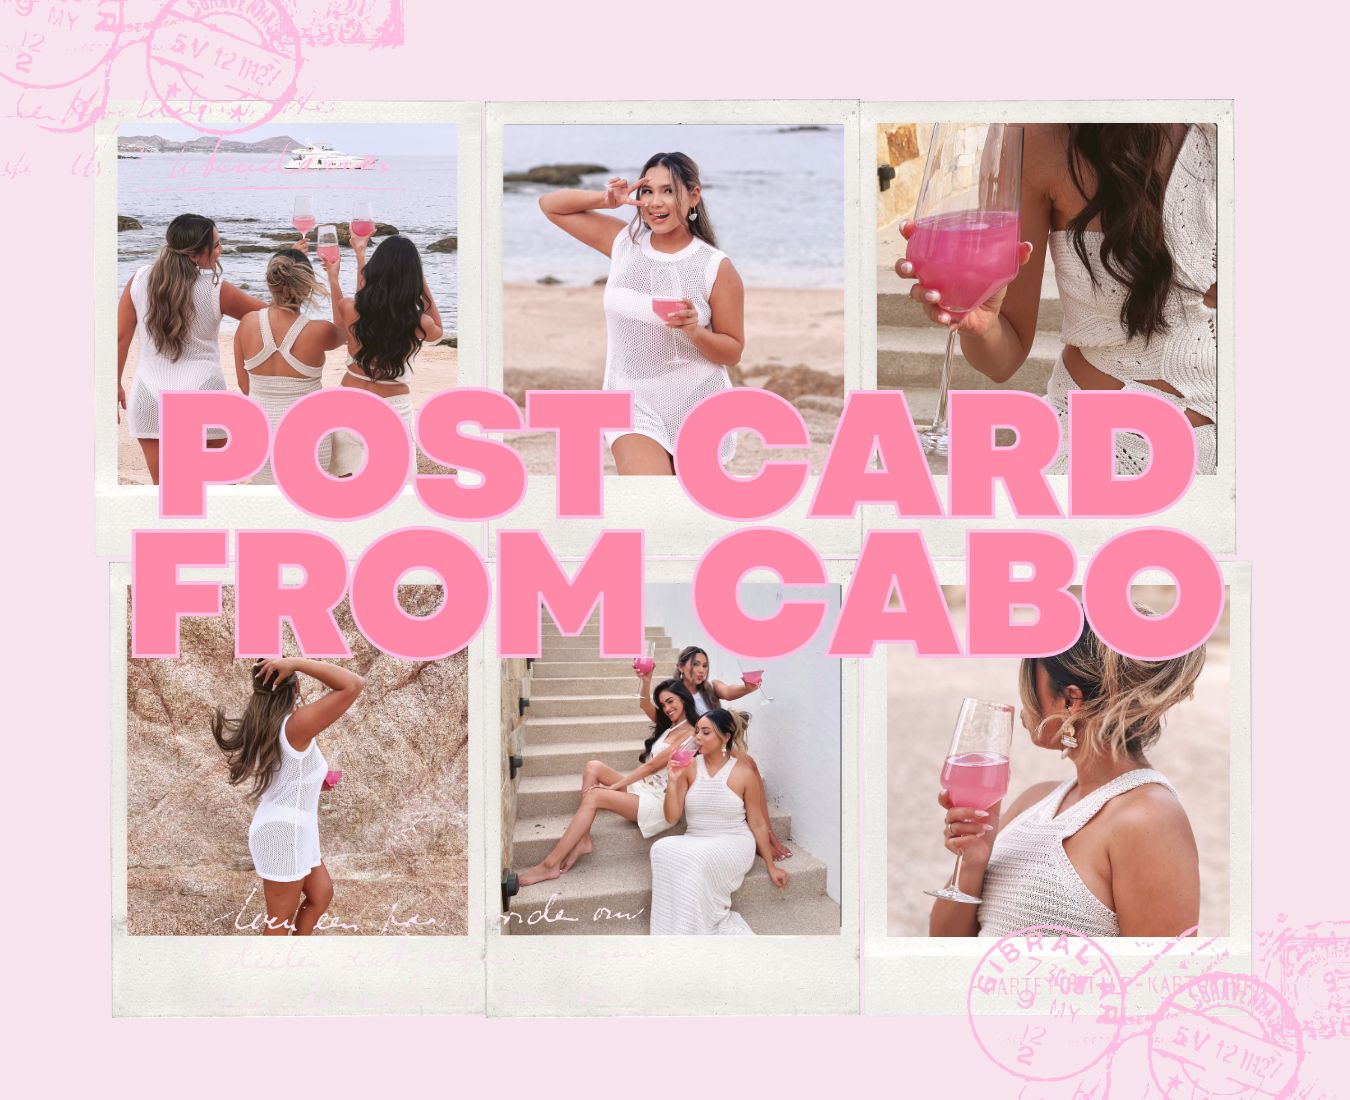 A Post Card from Cabo - Things to do when visiting Cabo San Lucas!